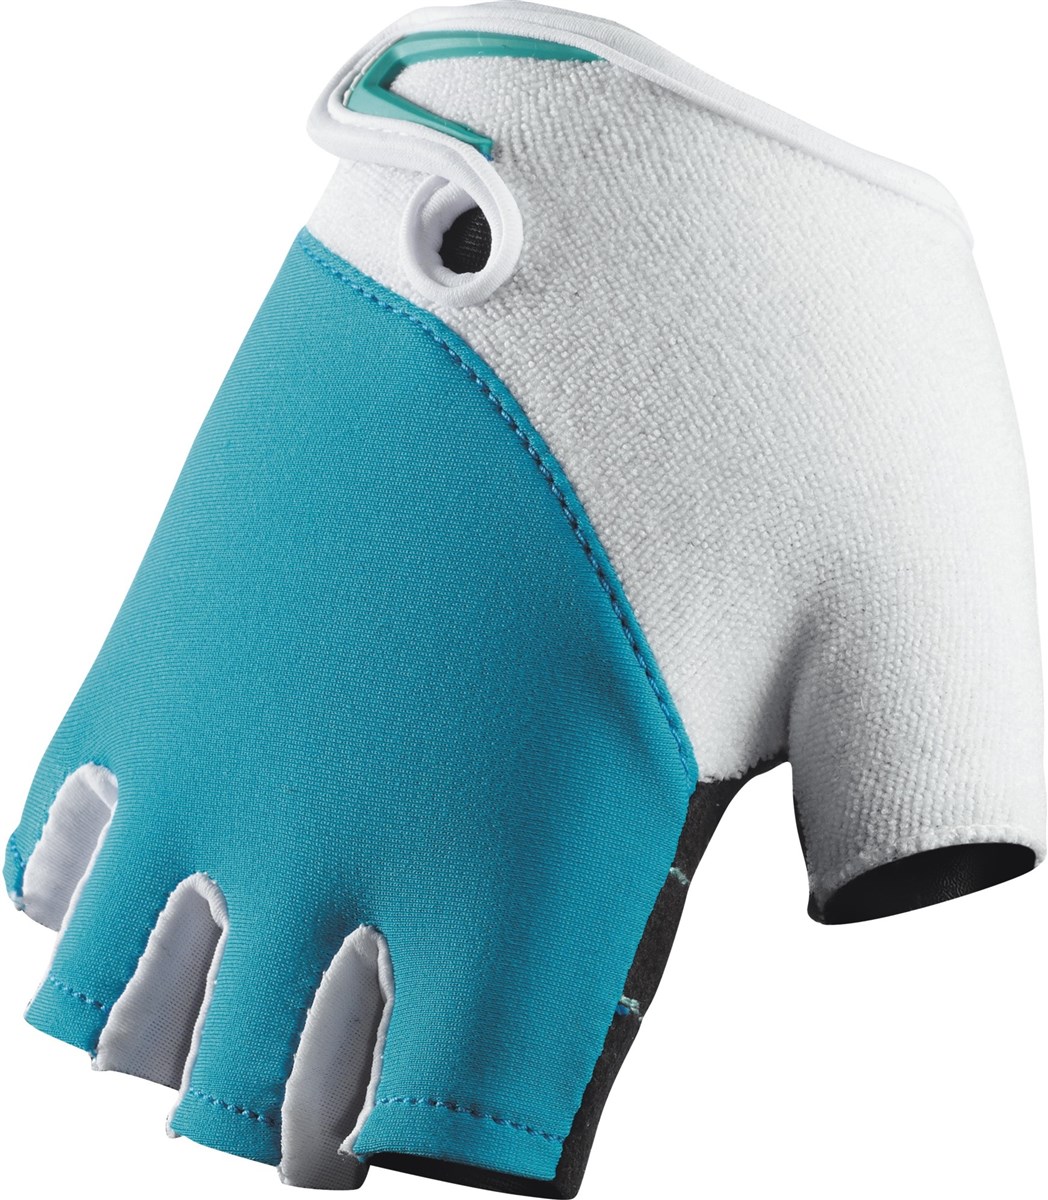 Scott Aspect Womens Short Finger Cycling Gloves product image